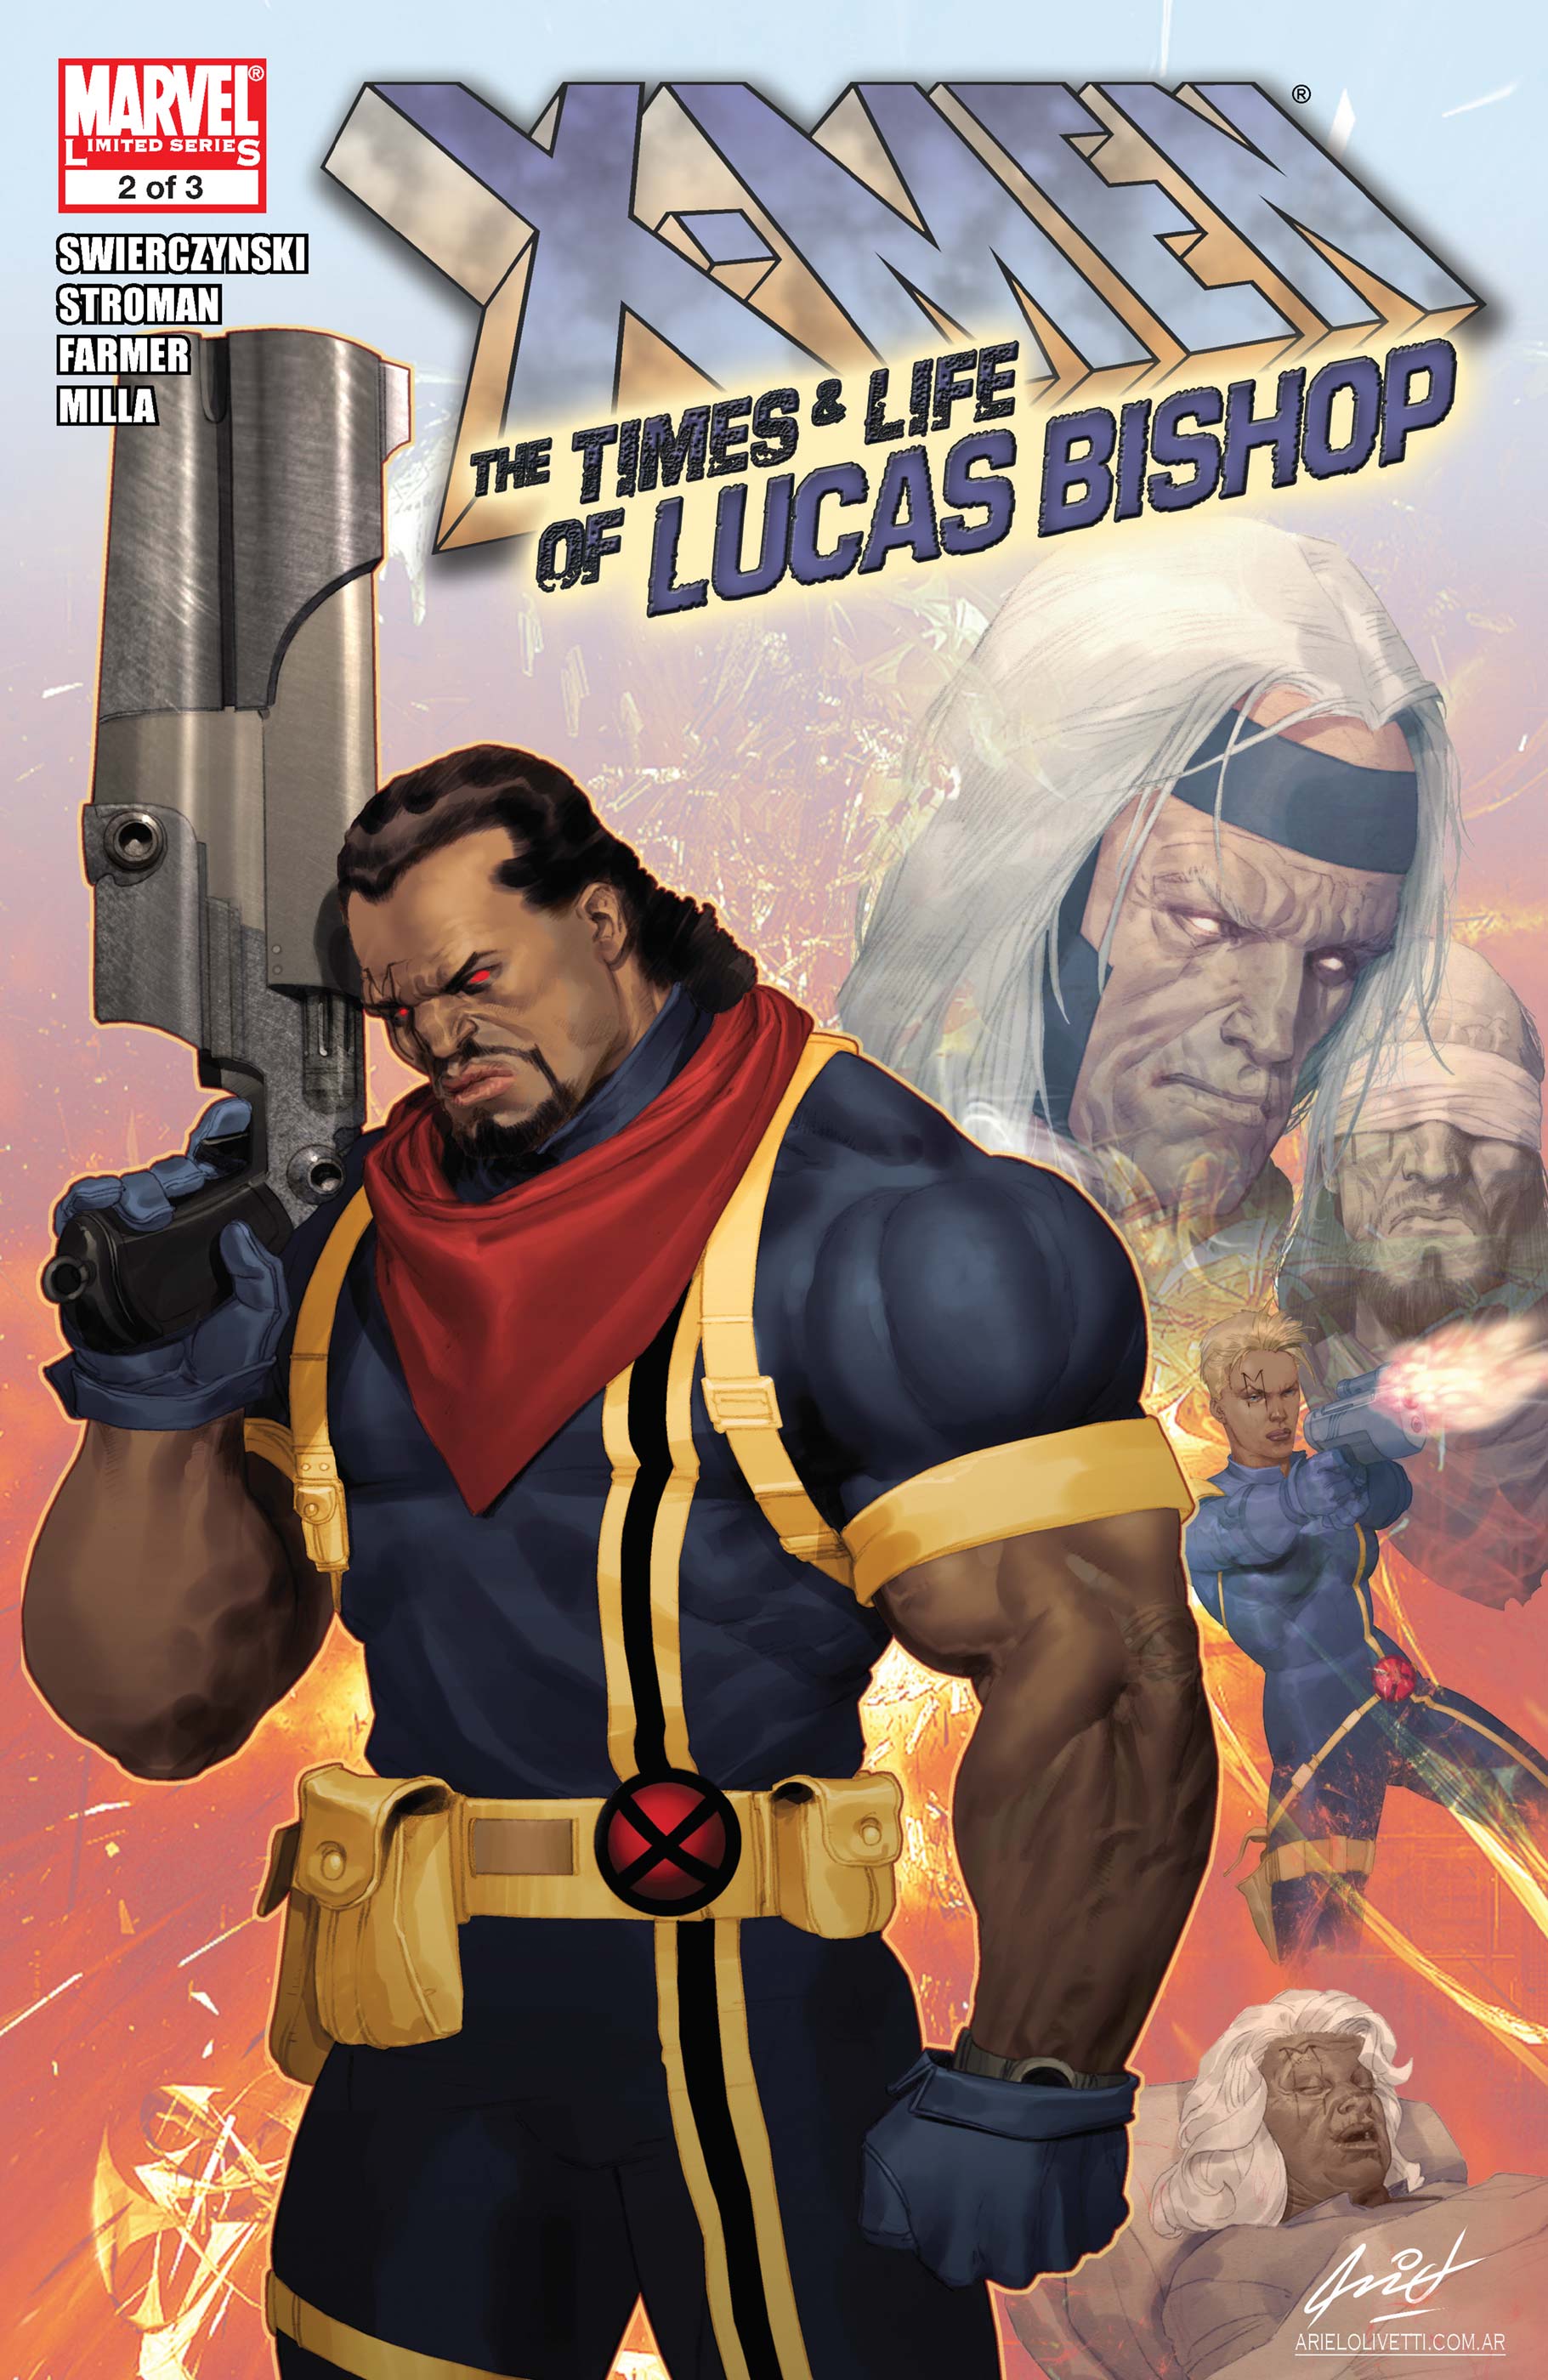 X-Men: The Lives and Times of Lucas Bishop (2009) #2